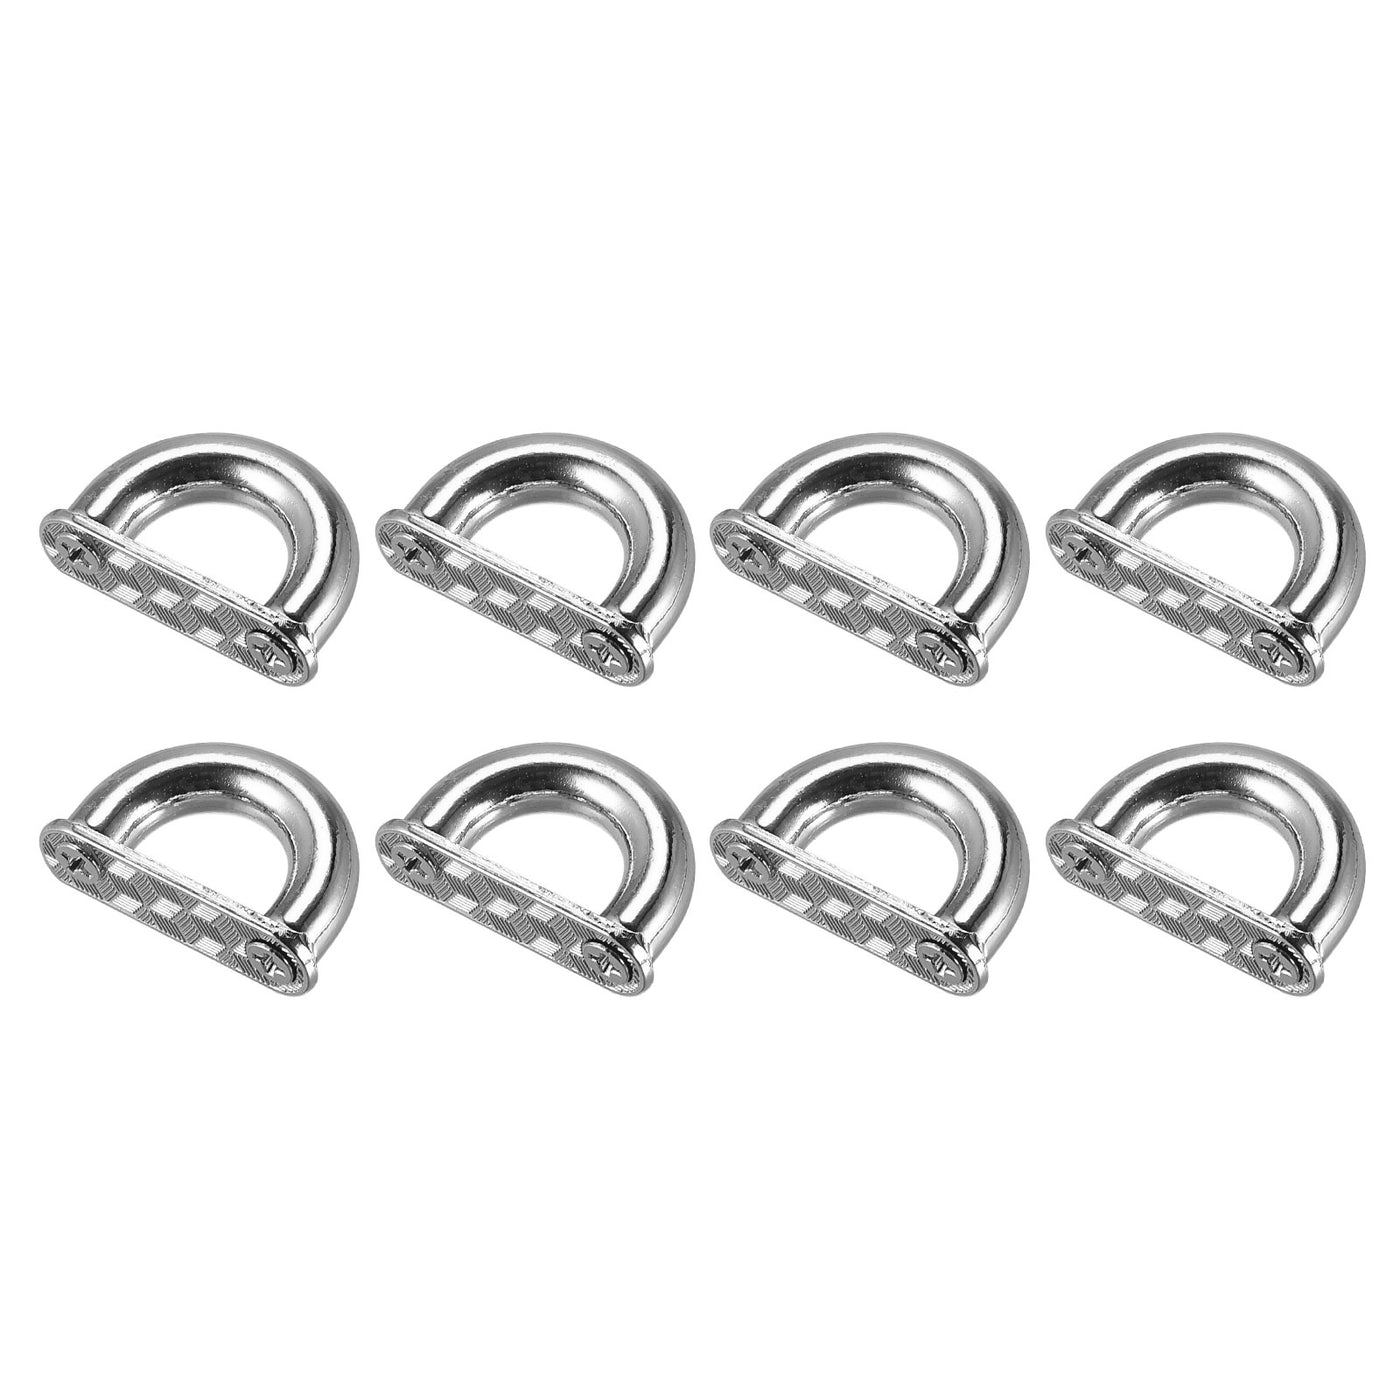 Uxcell Uxcell Arch Bridge Buckle, 8Pcs 27mm D-Ring Connector Buckles for Bag Hanger DIY, Black